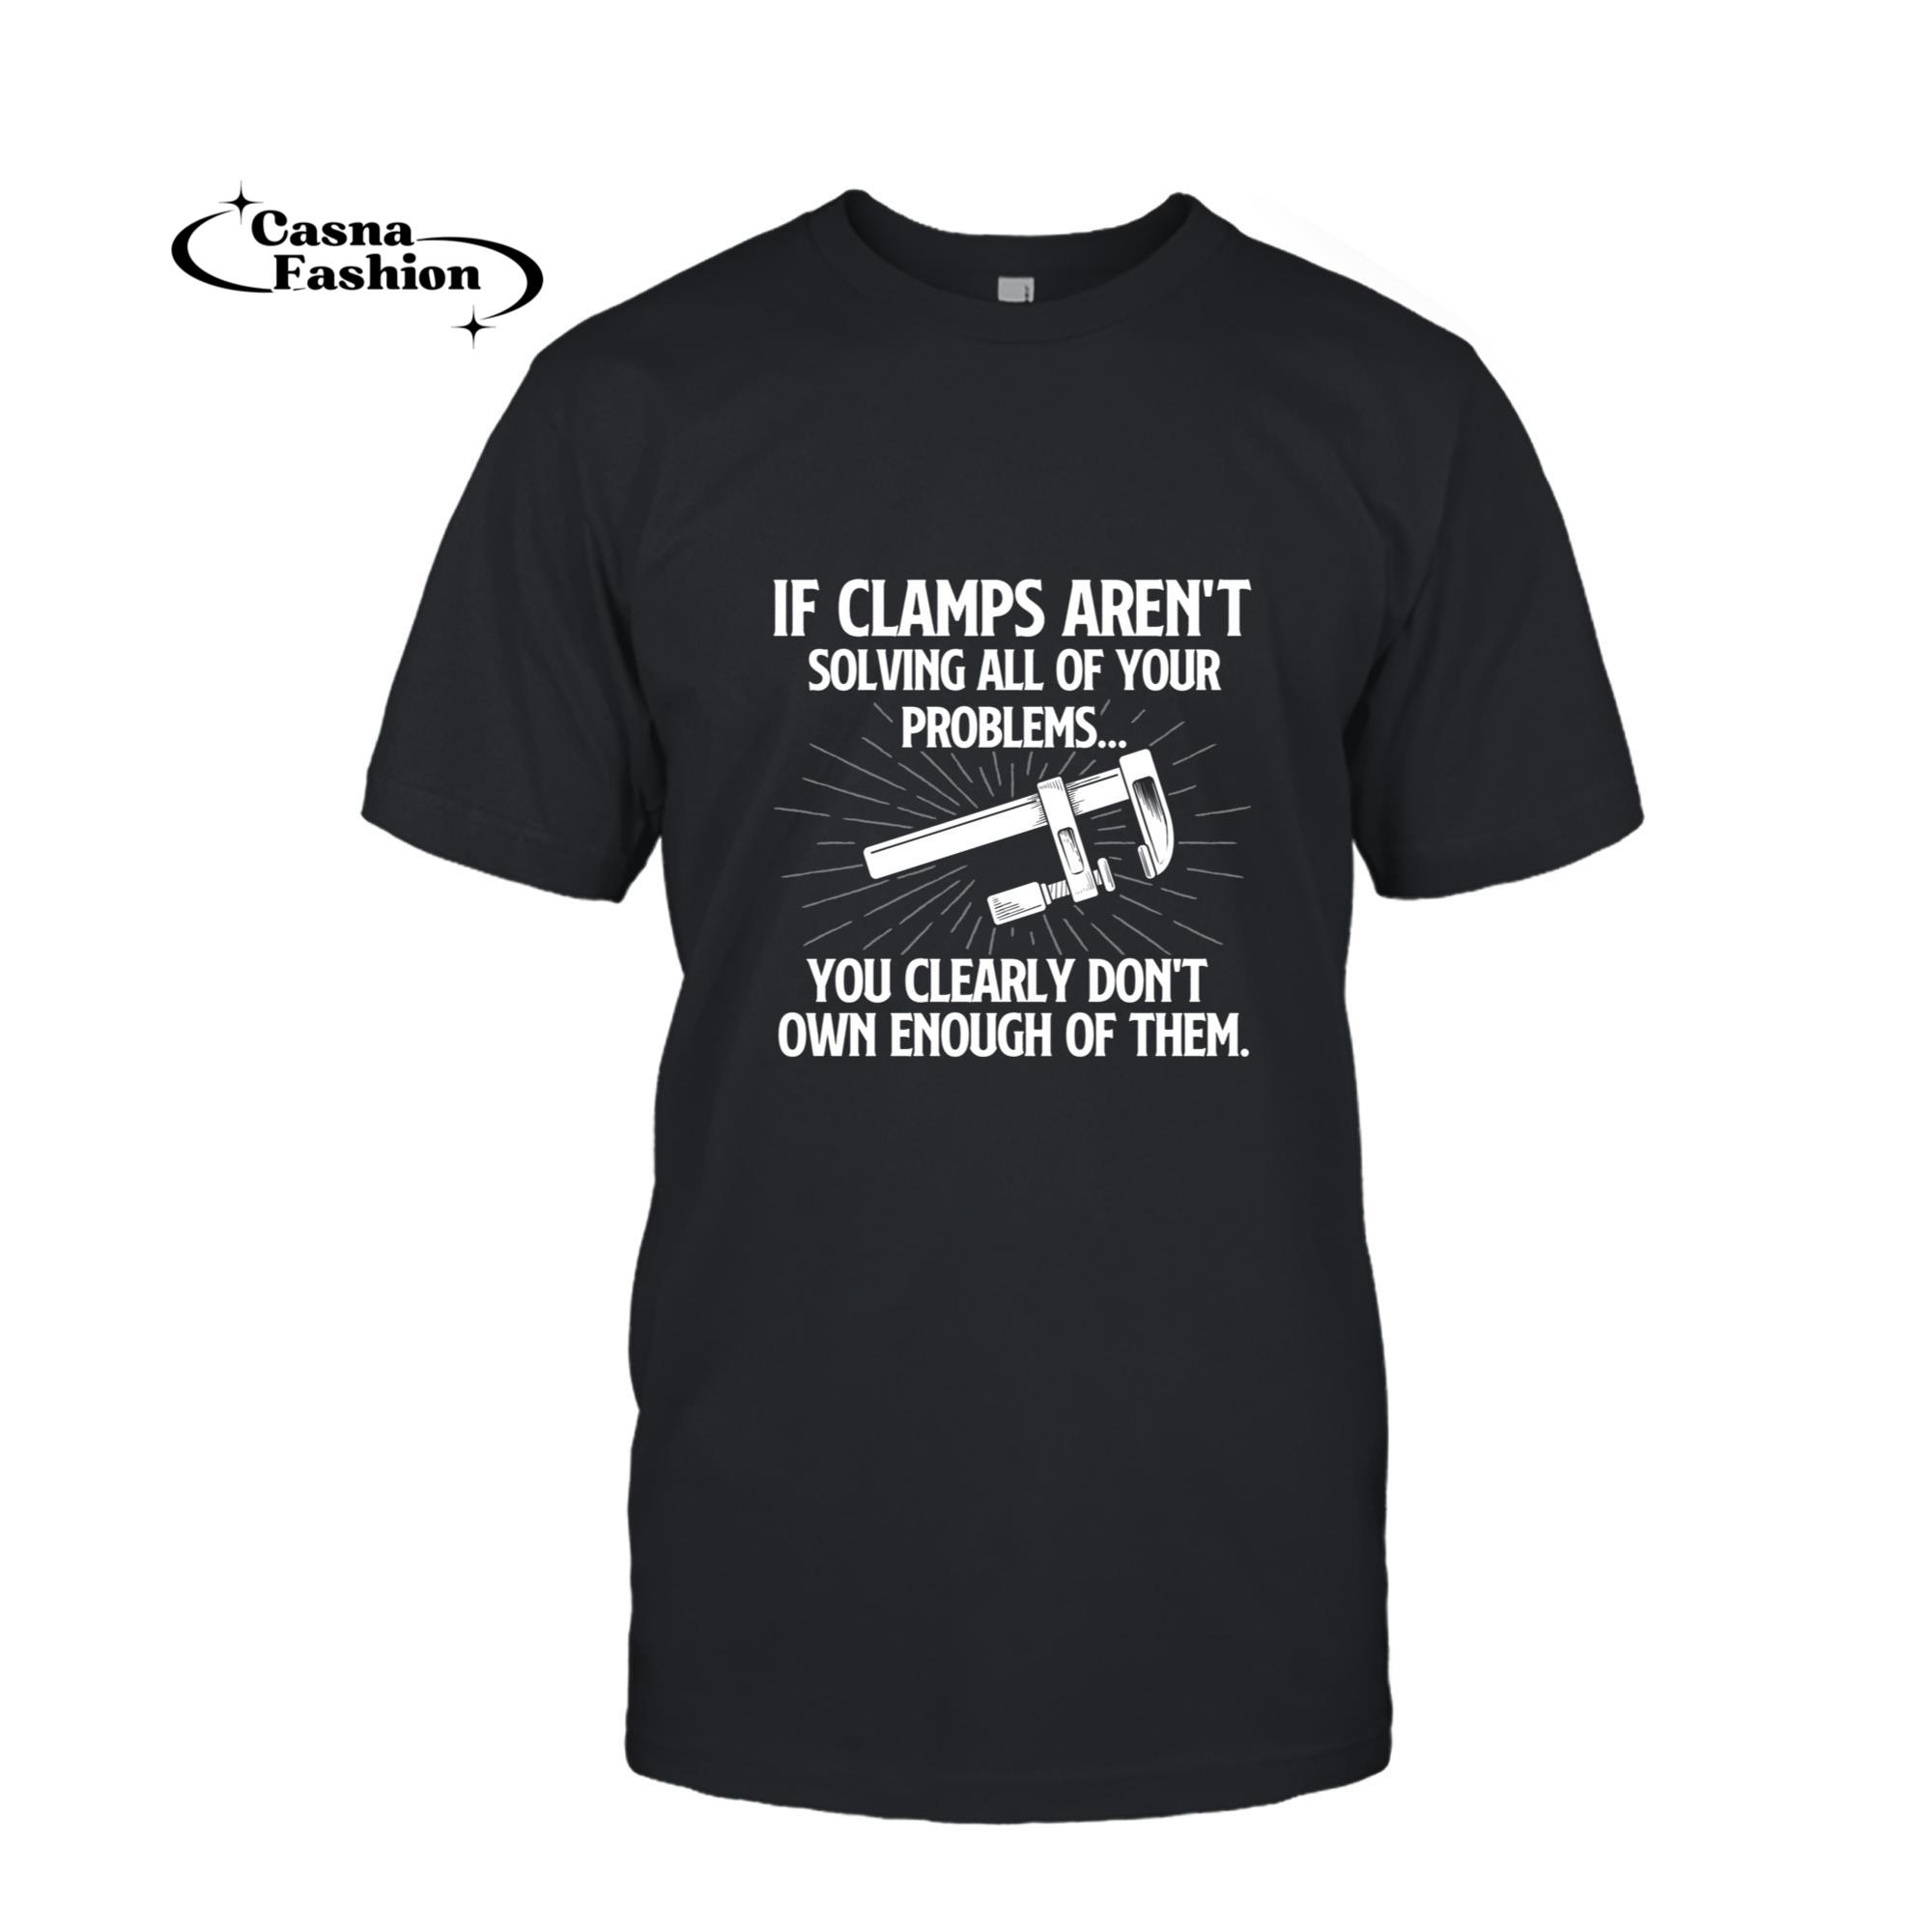 casnafashion_T-shirt_You Clearly Don't Own Enough Of Them - Woodworking Carpenter Long Sleeve T-Shirt_T-shirt_Black